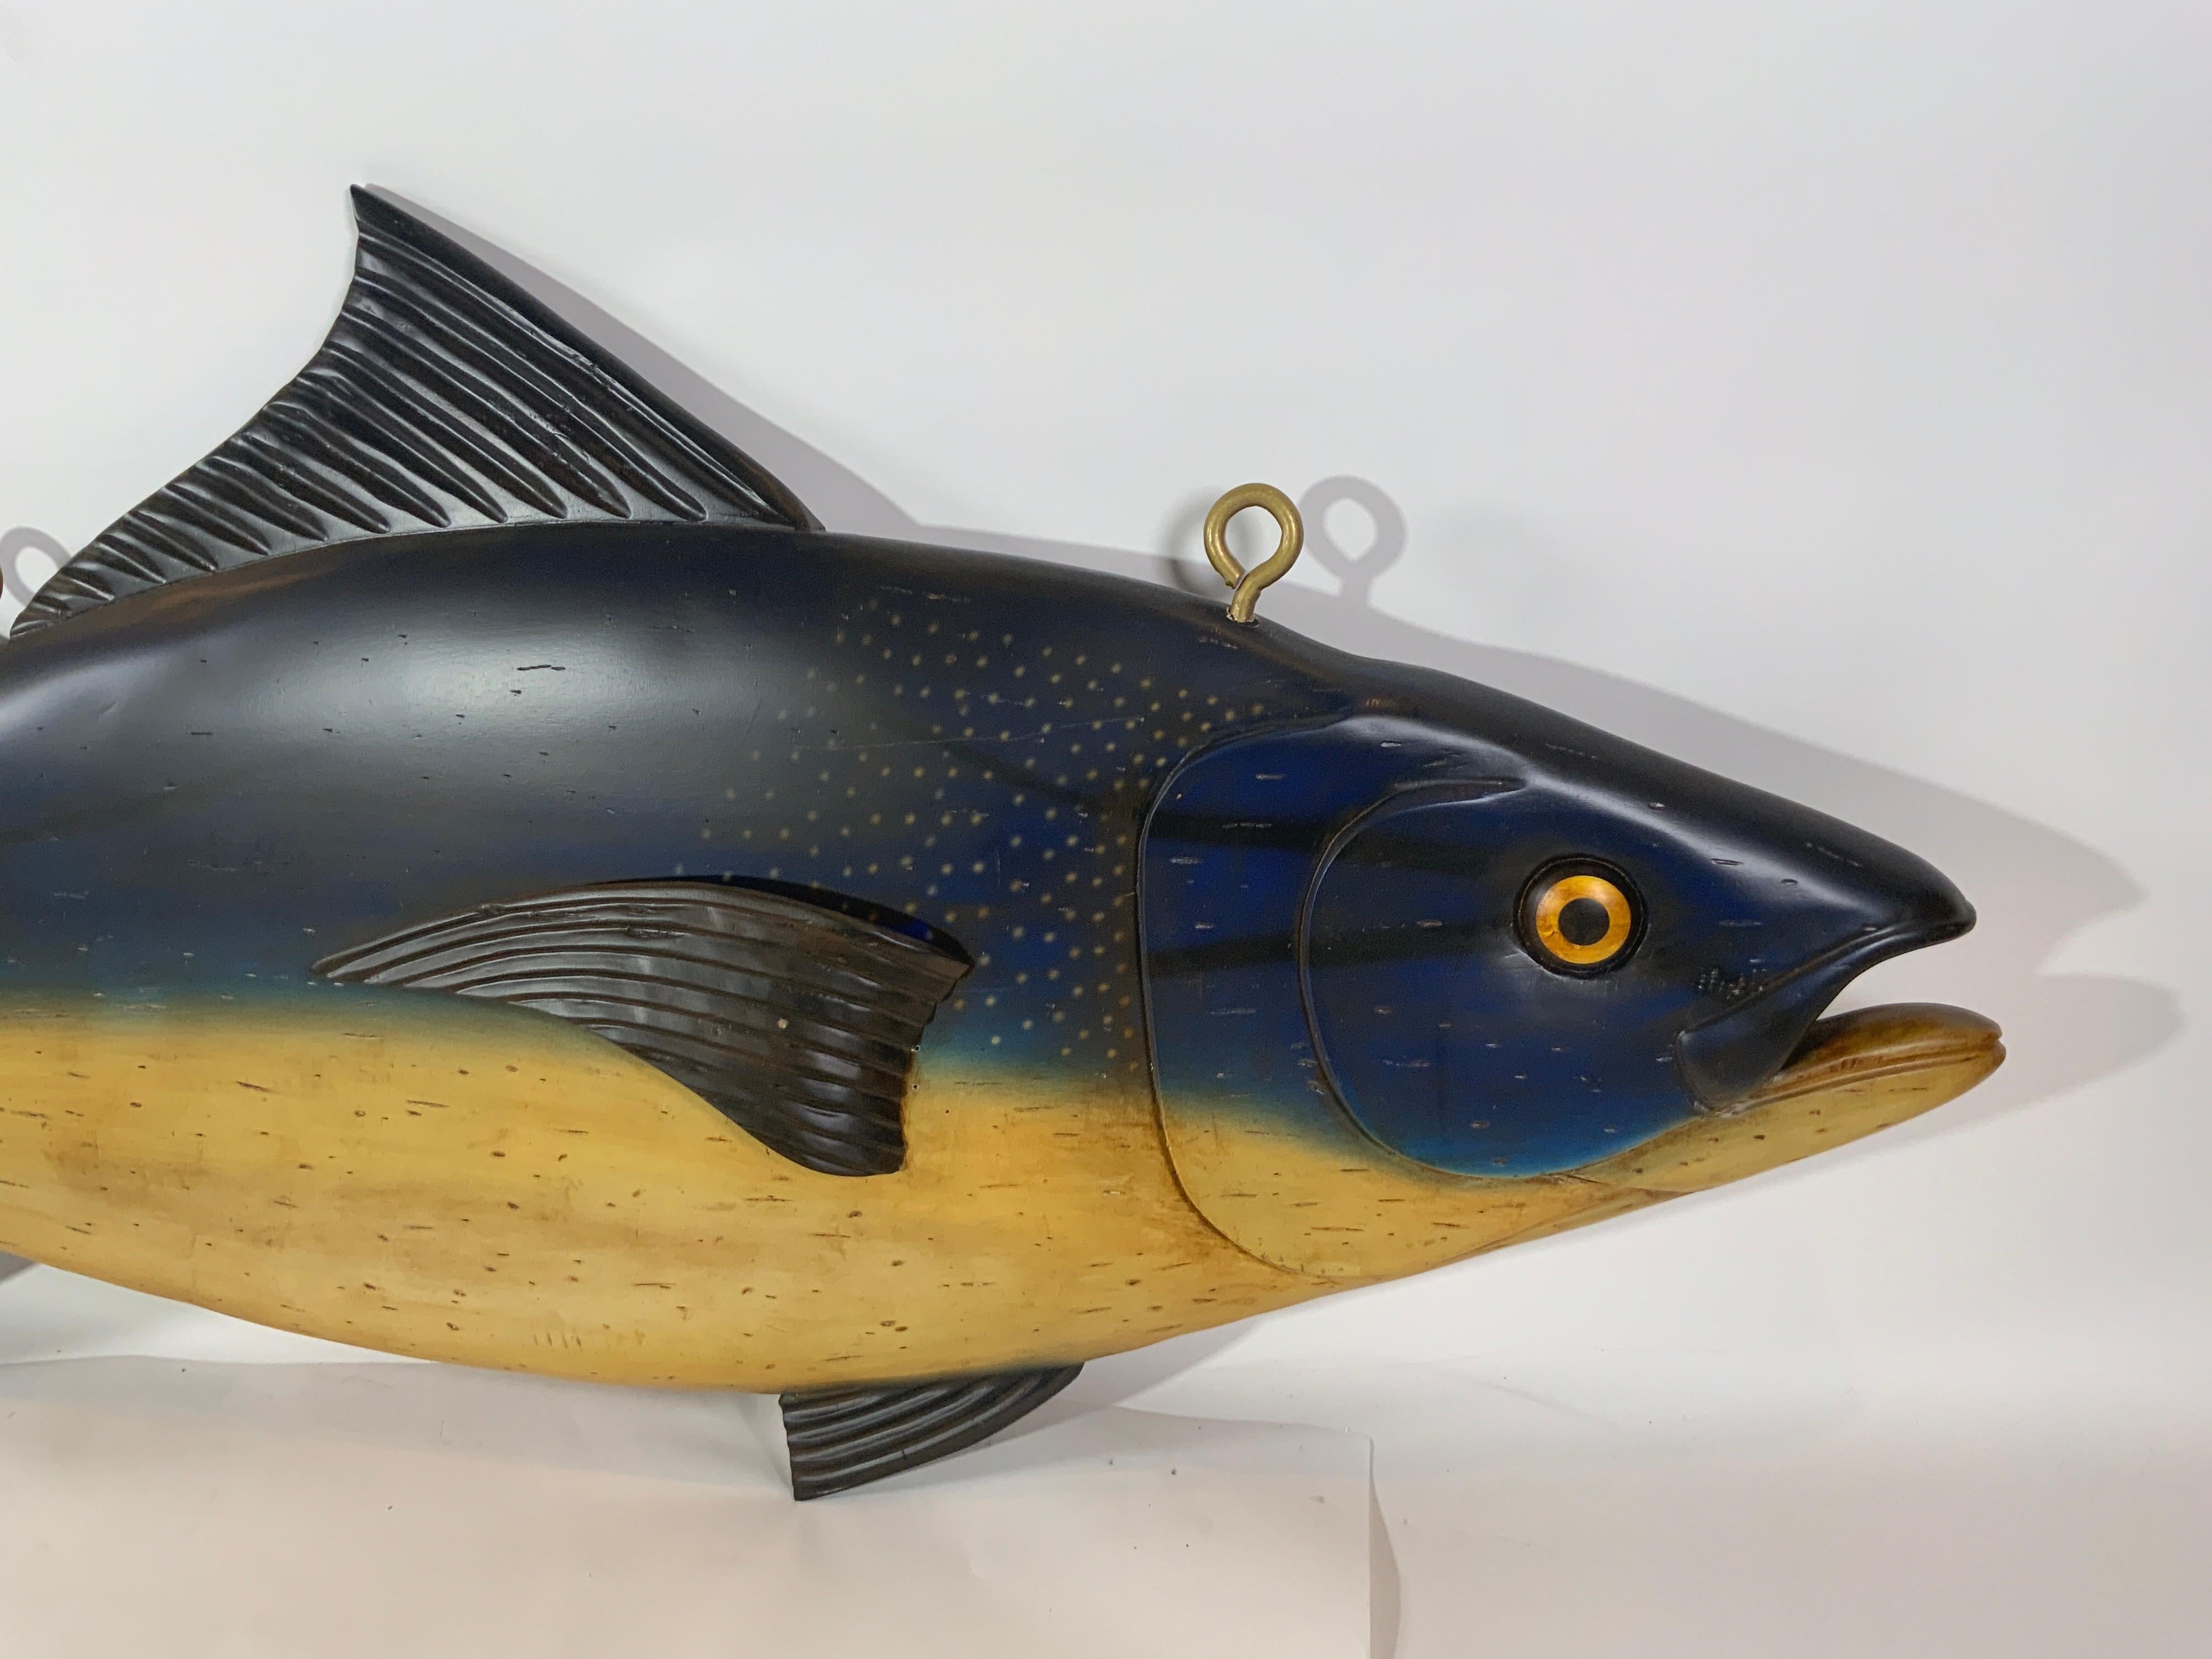 Carved and painted Atlantic Bluefin tuna. Carved fins, gills, eyes and snout. Fitted with iron hanging bolts. This carved fish is reminiscent of the trade signs that would hang in the fishmongers stalls at the Dover Fish Markets in